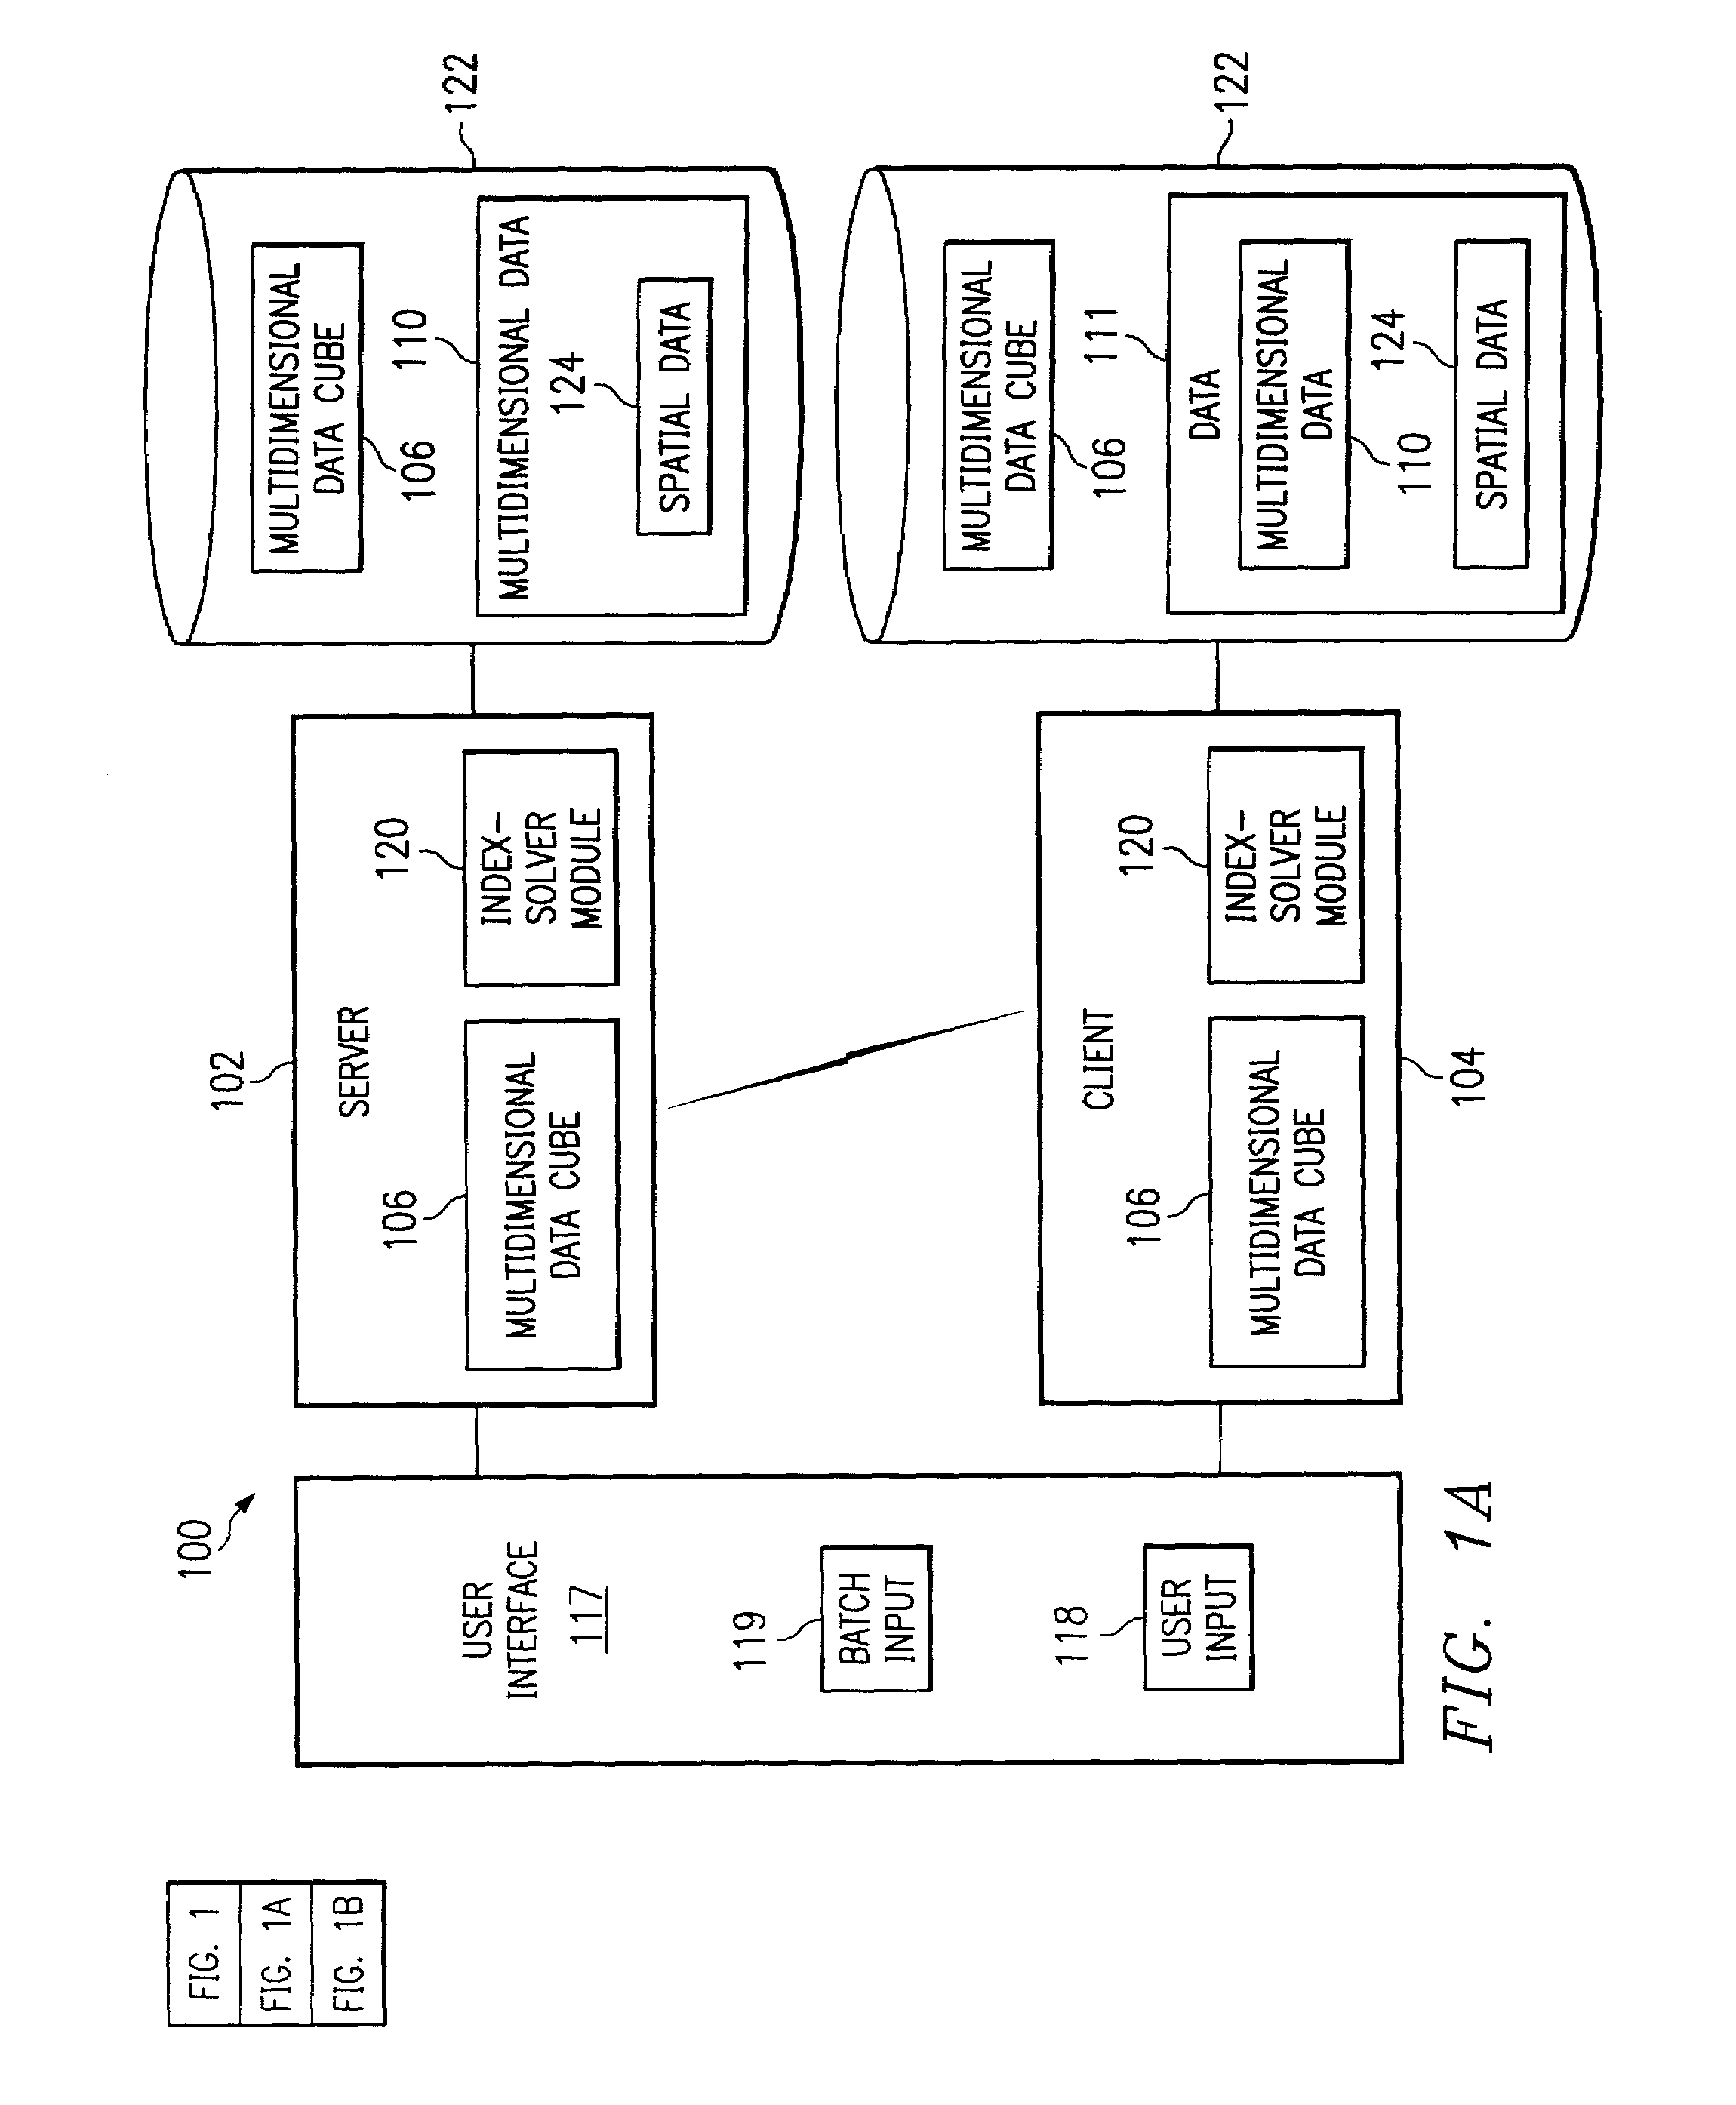 Systems, methods, and computer program products to reduce computer processing in grid cell size determination for indexing of multidimensional databases